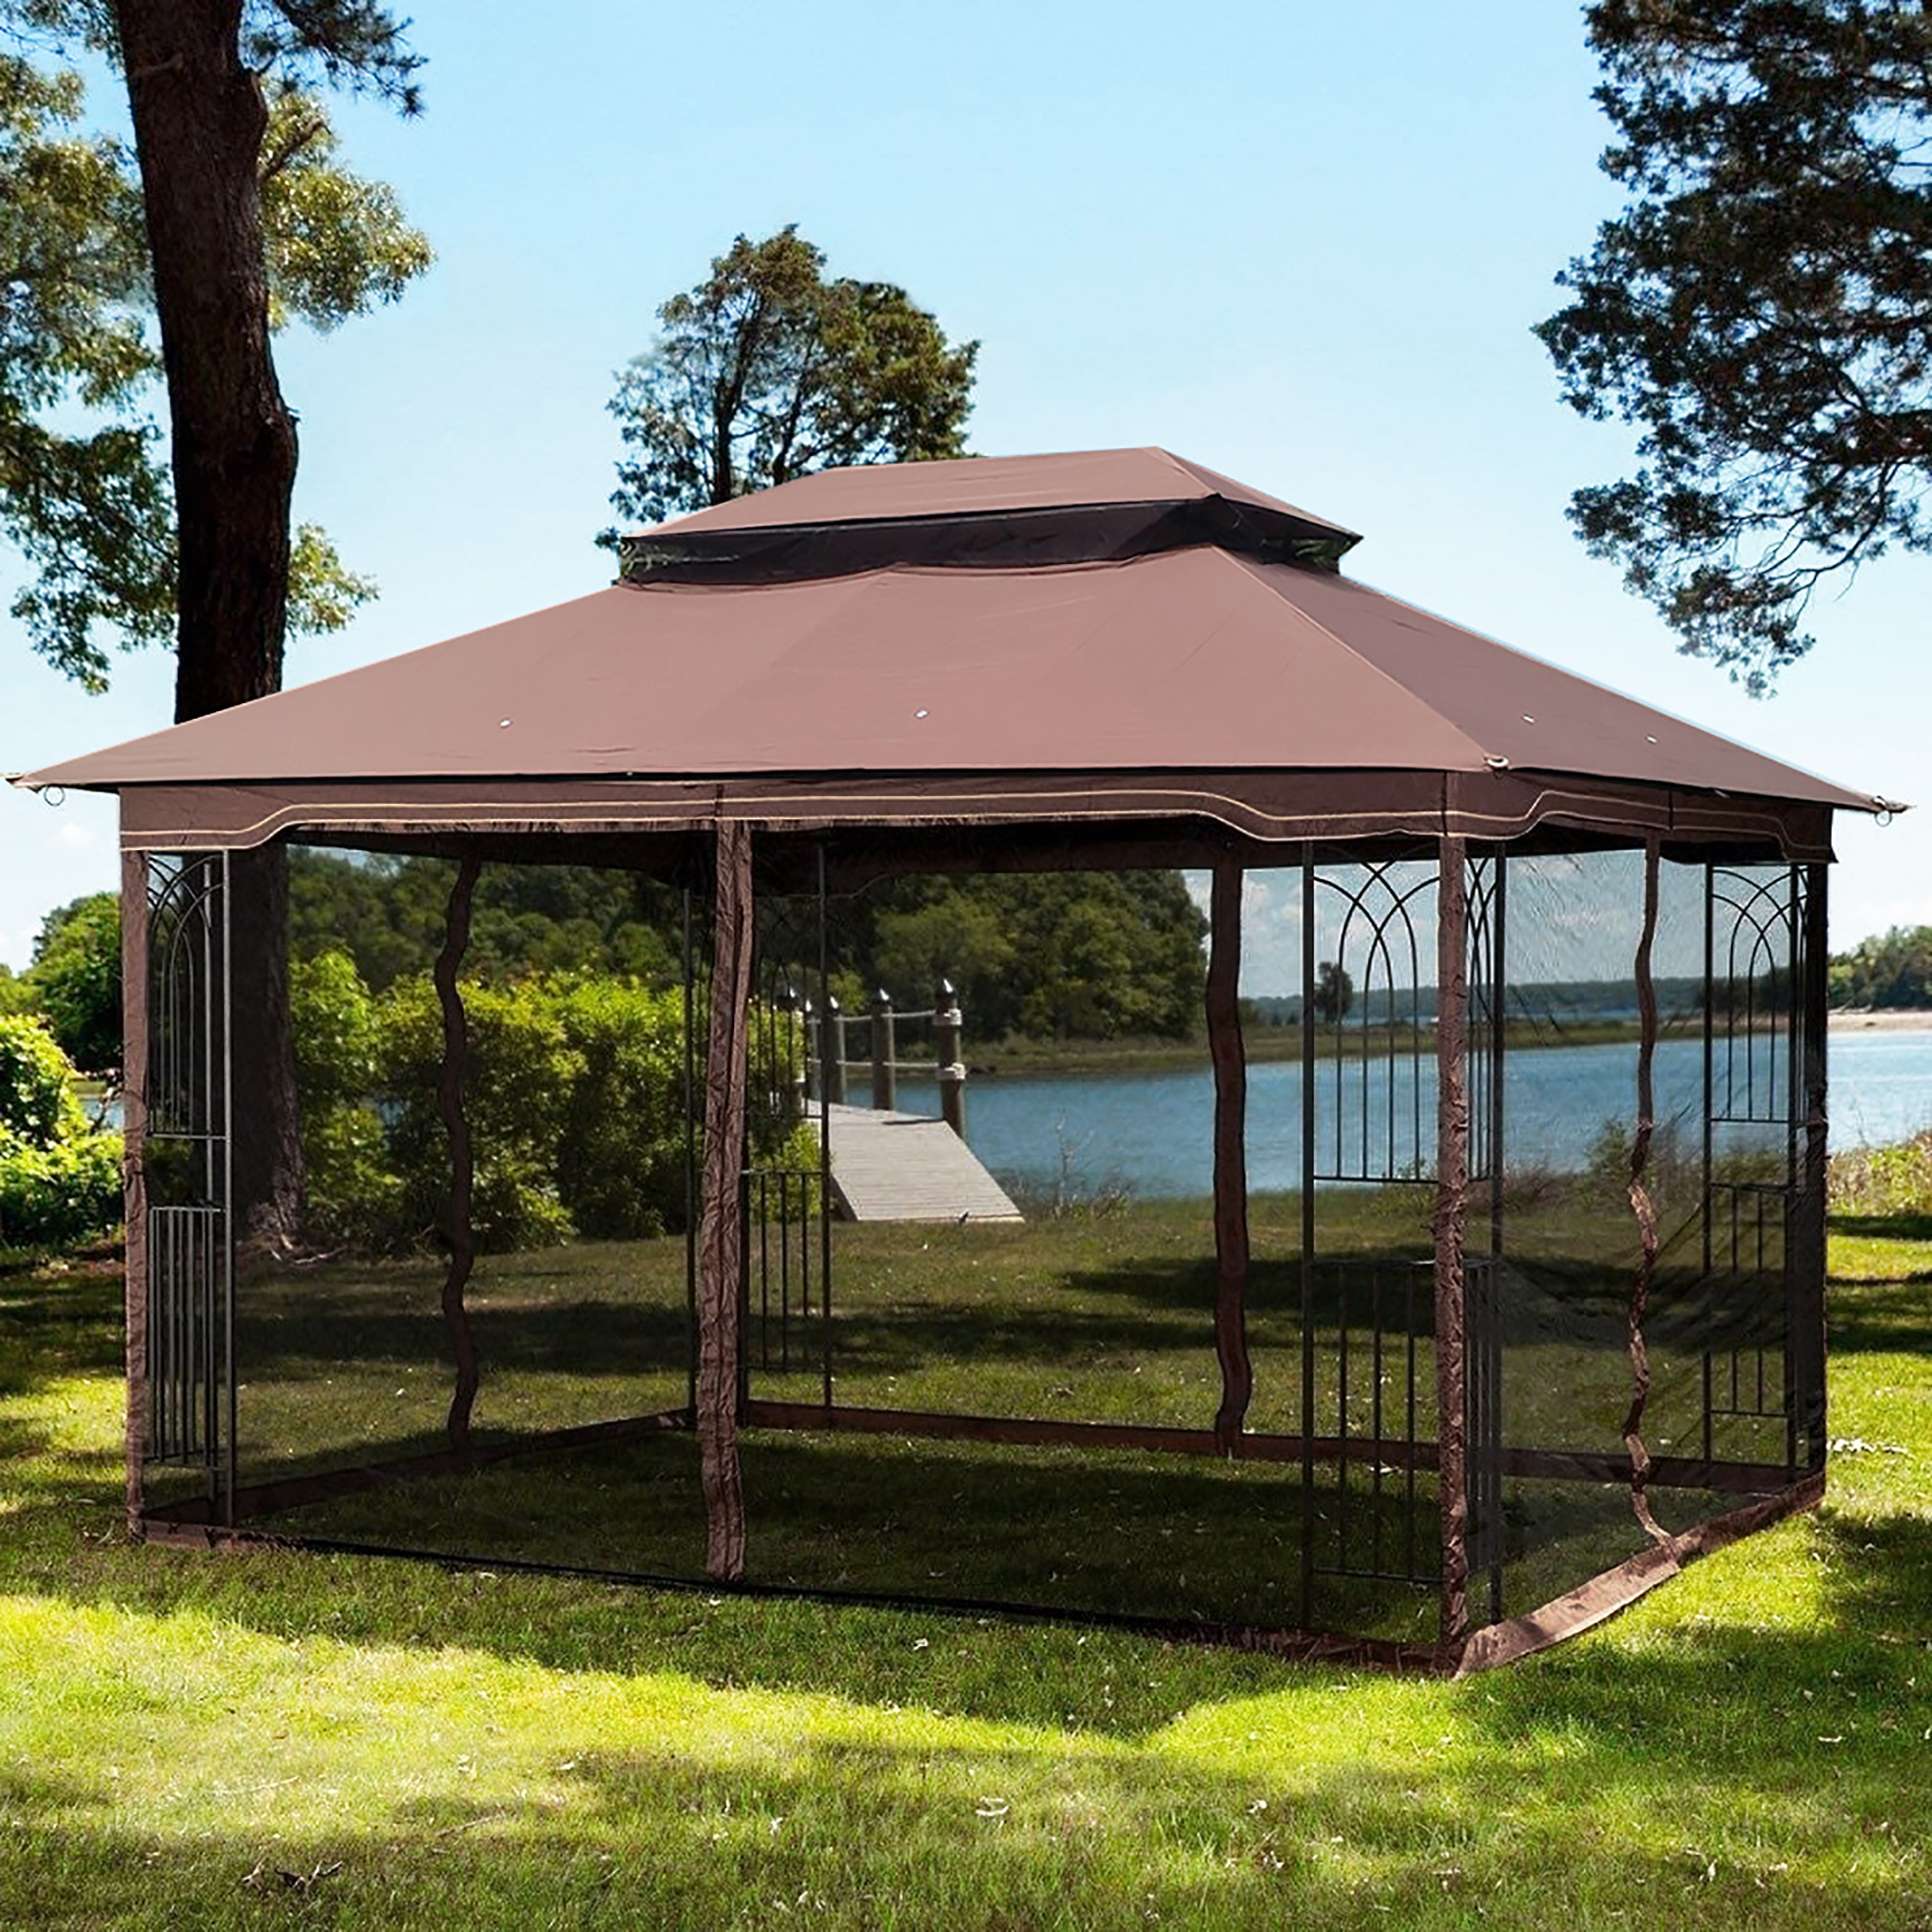 13x10 Outdoor Patio Gazebo Canopy Tent With Ventilated Double Roof And Mosquito net(Detachable Mesh Screen On All Sides),Suitable for Lawn, Garden, Backyard and Deck,Brown Top-CASAINC